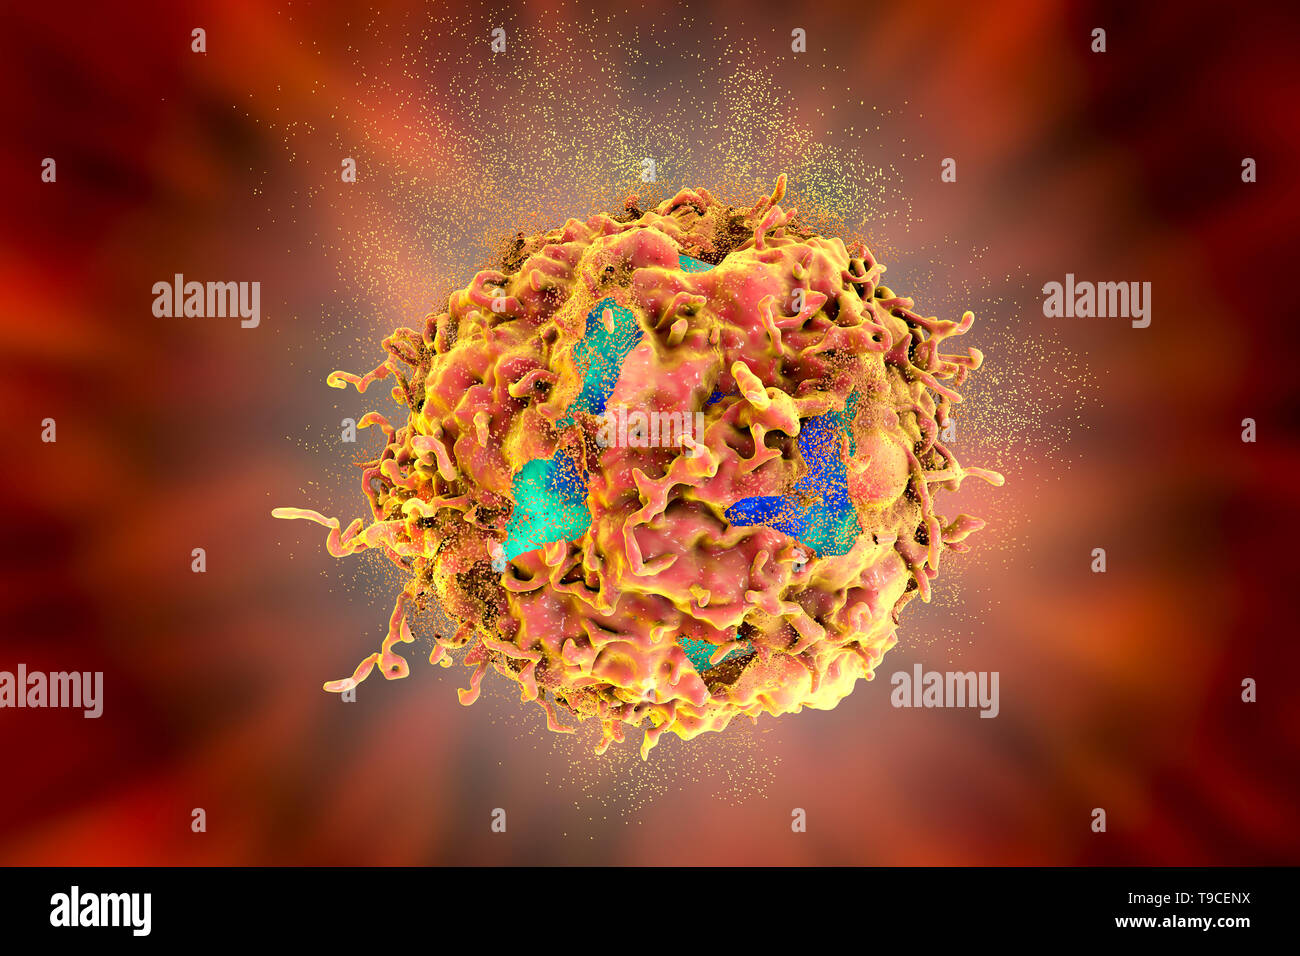 Destruction of a cancer cell, illustration Stock Photo